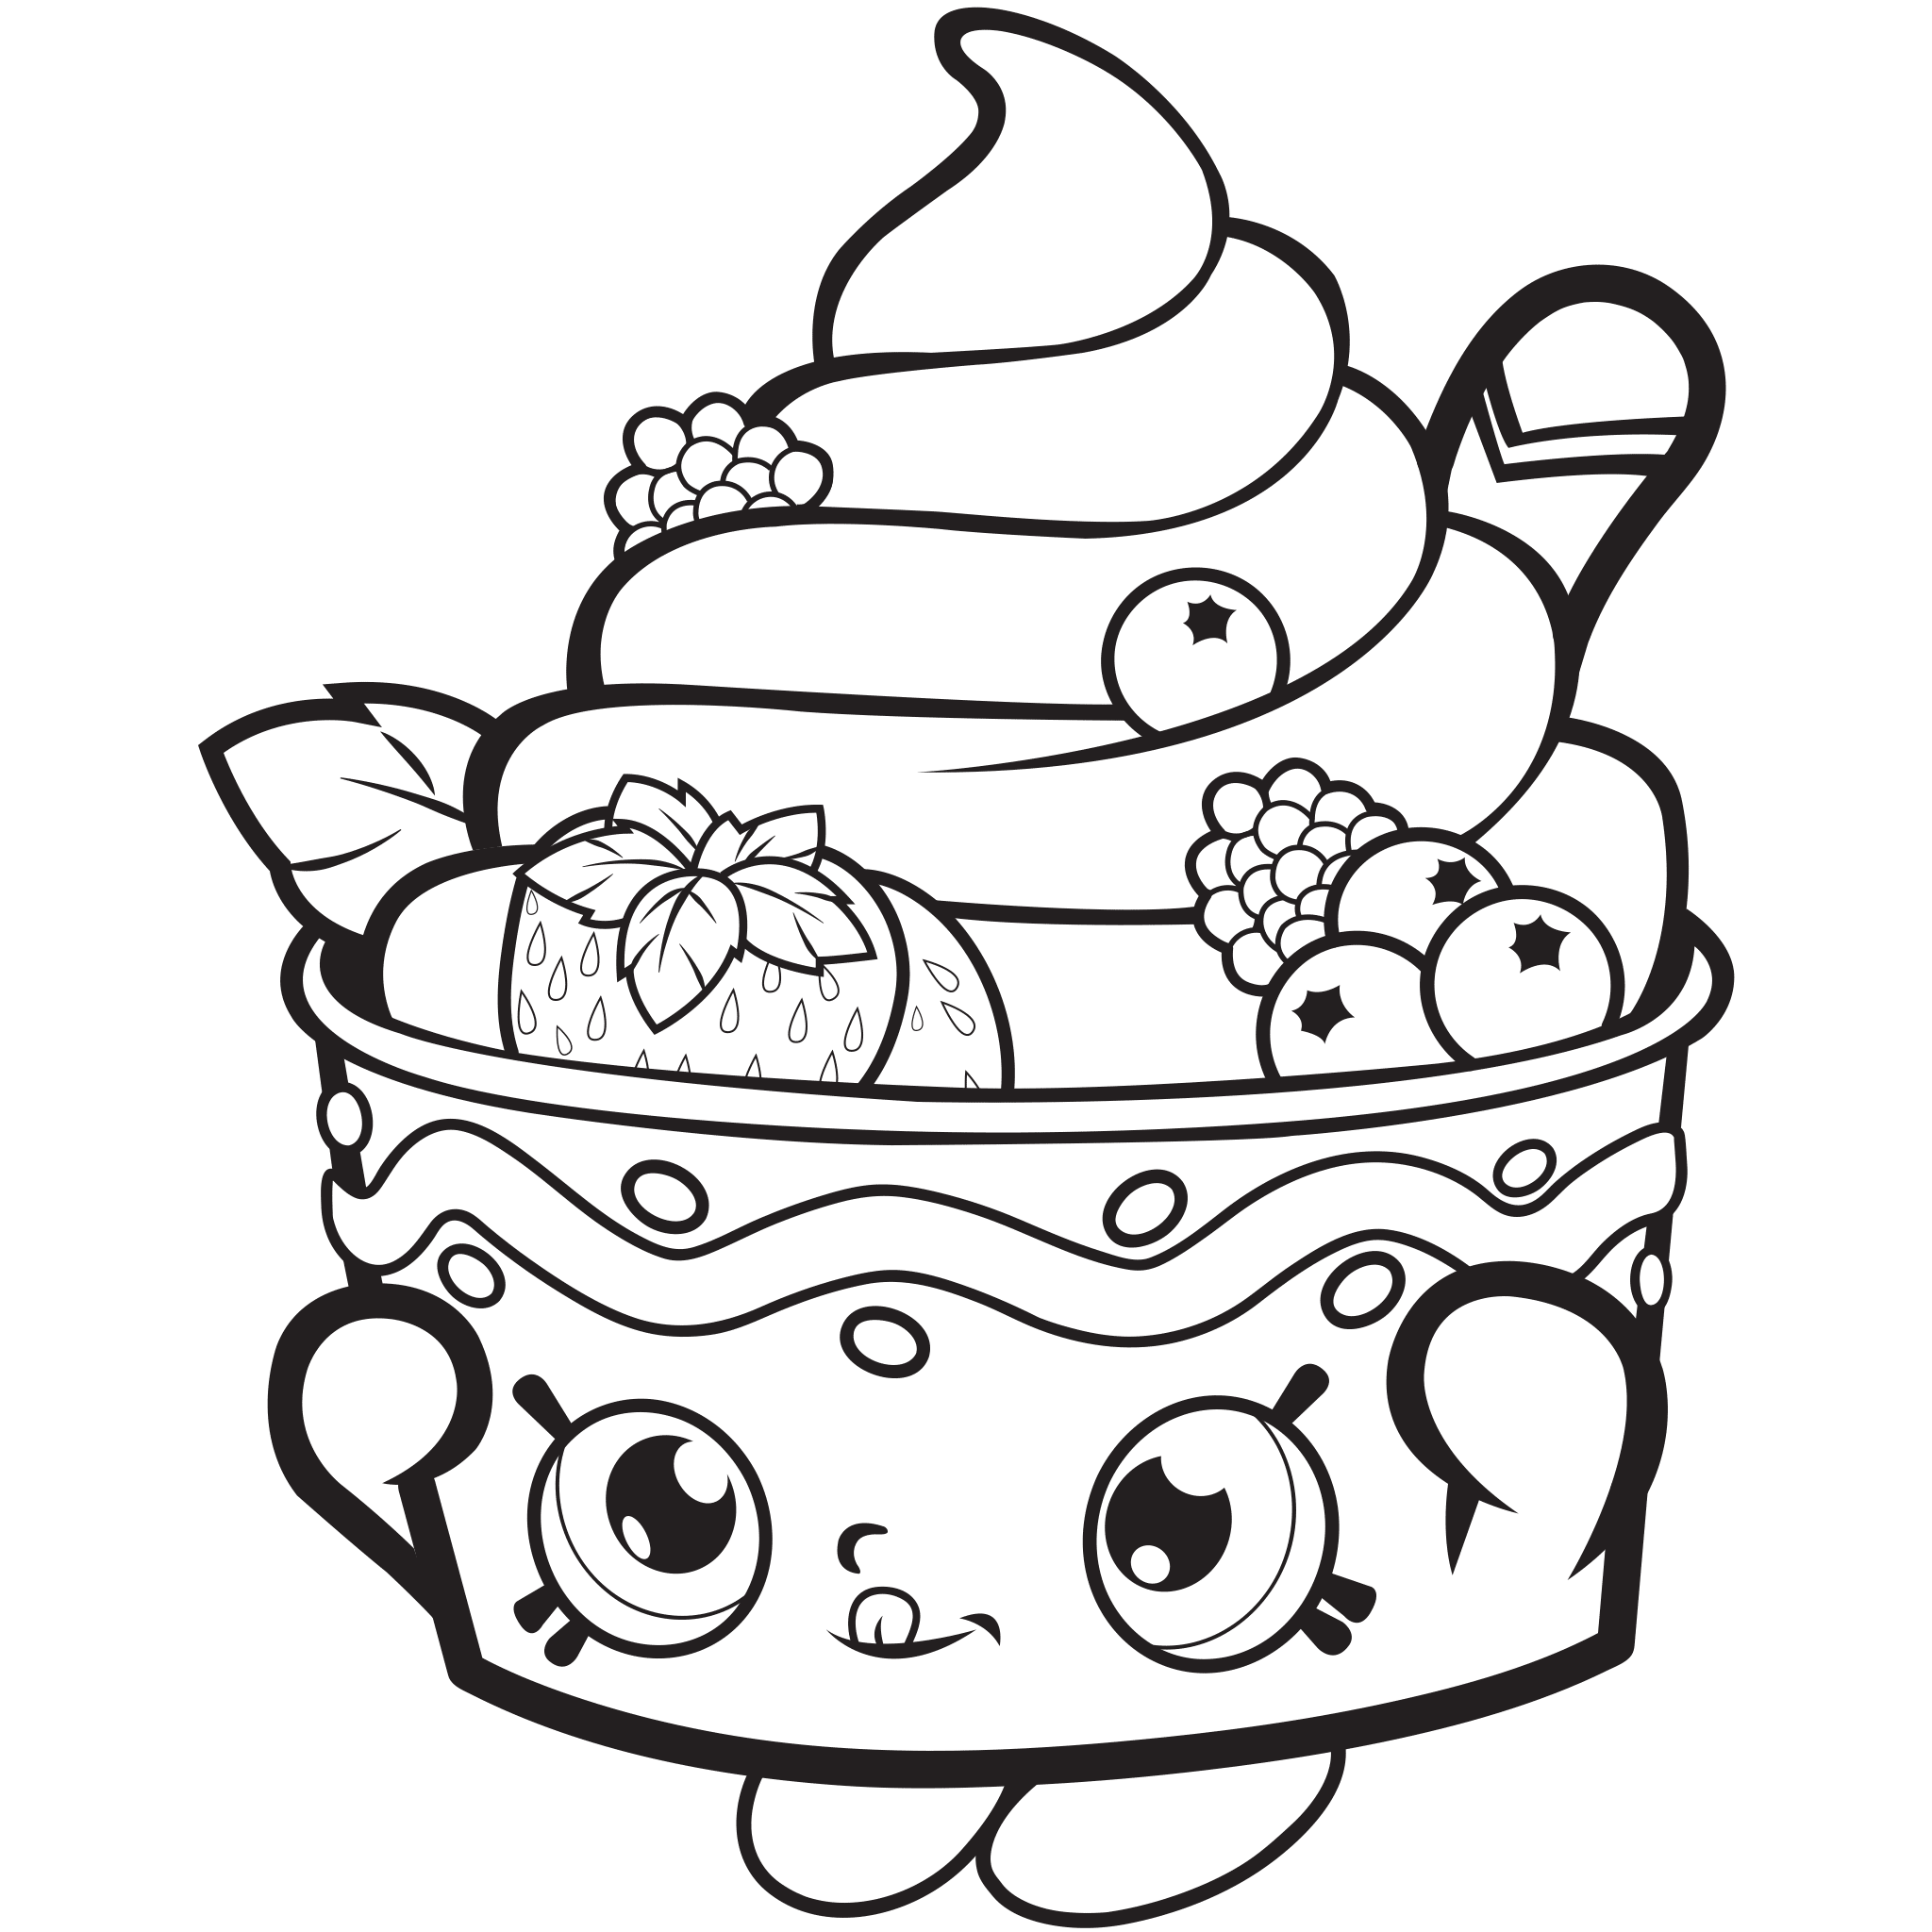 Shopkin Coloring Pages Printable at GetDrawings | Free download